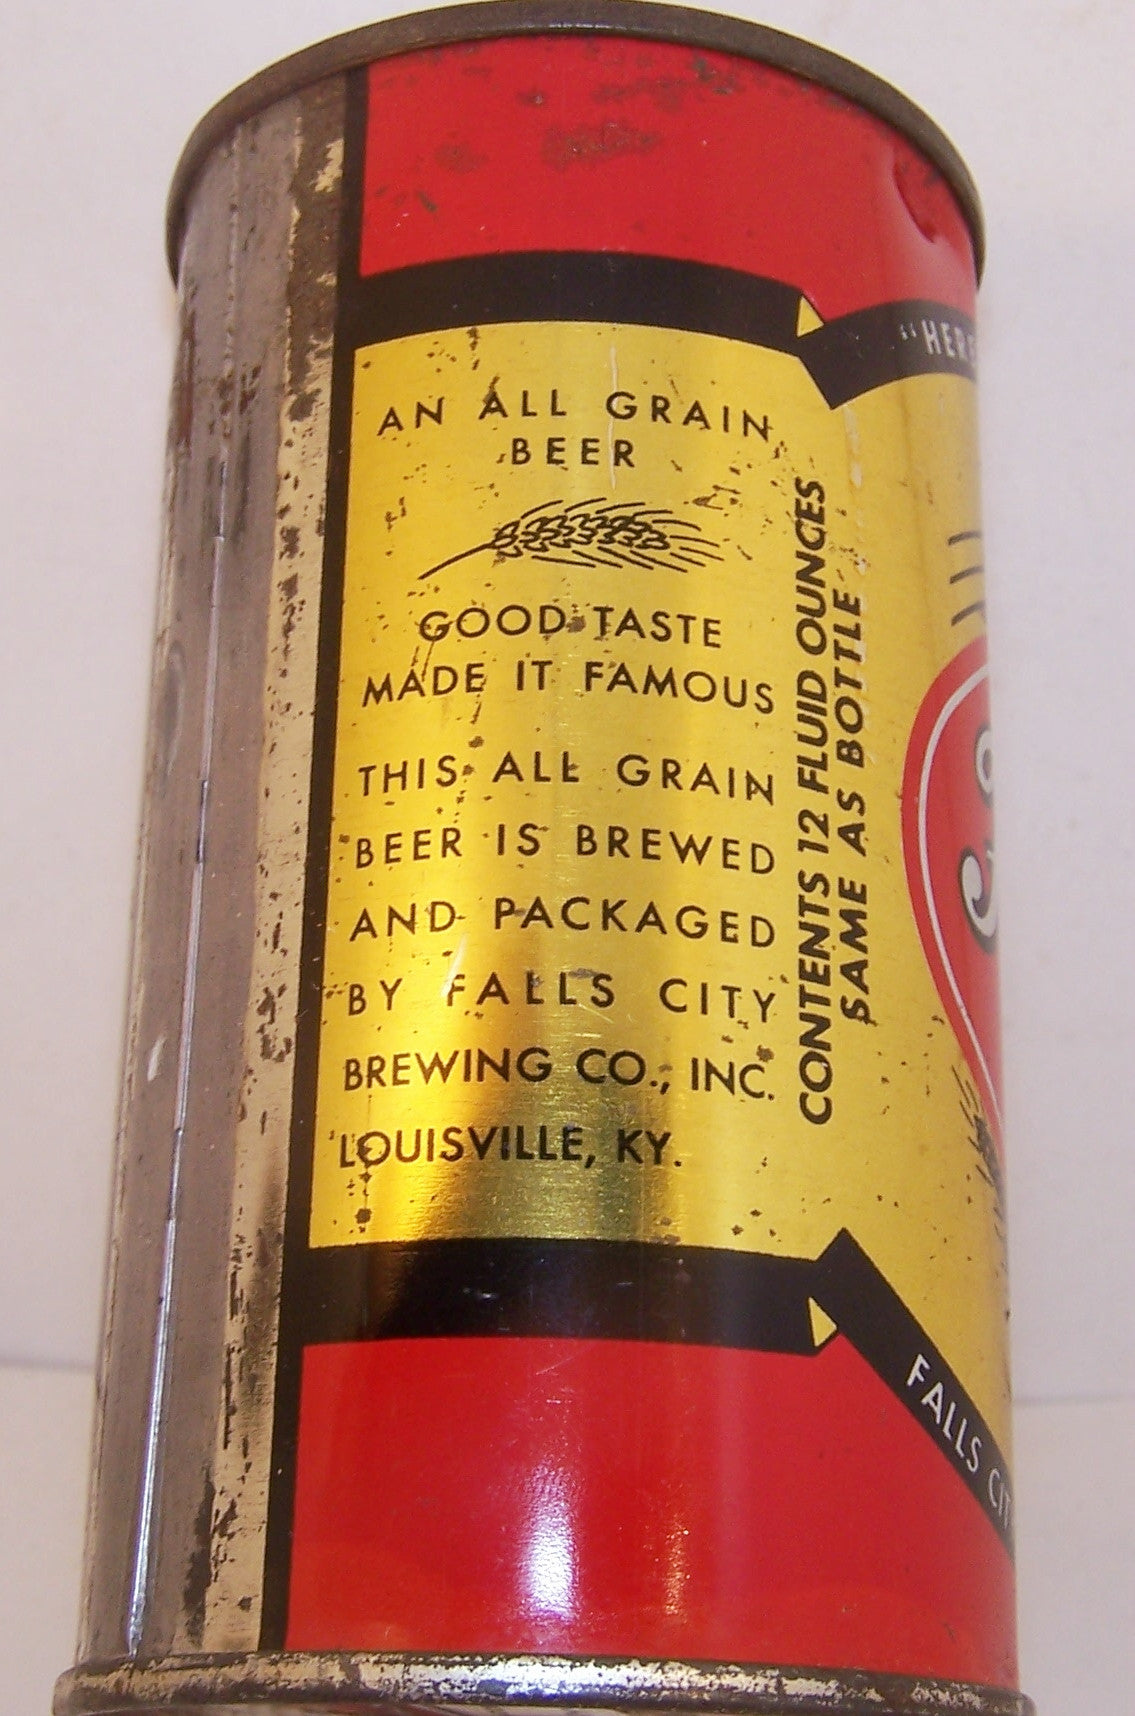 Falls City Beer, Lilek page # 257, Grade 1/1- Sold on 4/15/15